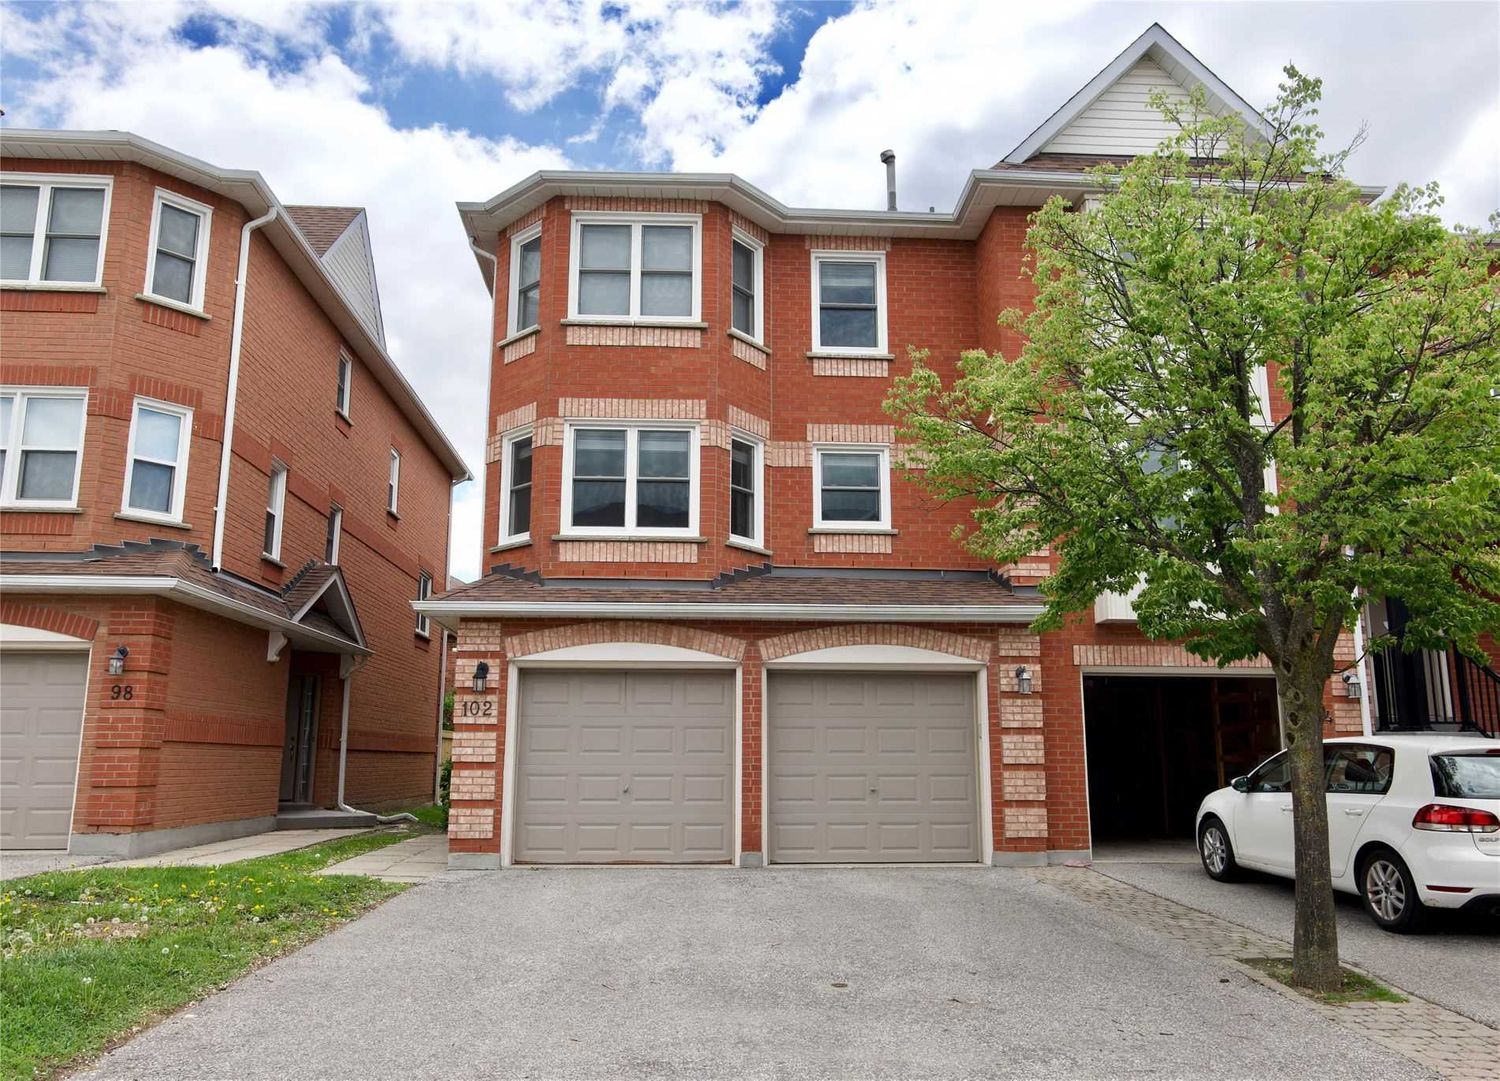 1-118 Leah Crescent. Leah Crescent Townhomes is located in  Vaughan, Toronto - image #2 of 3